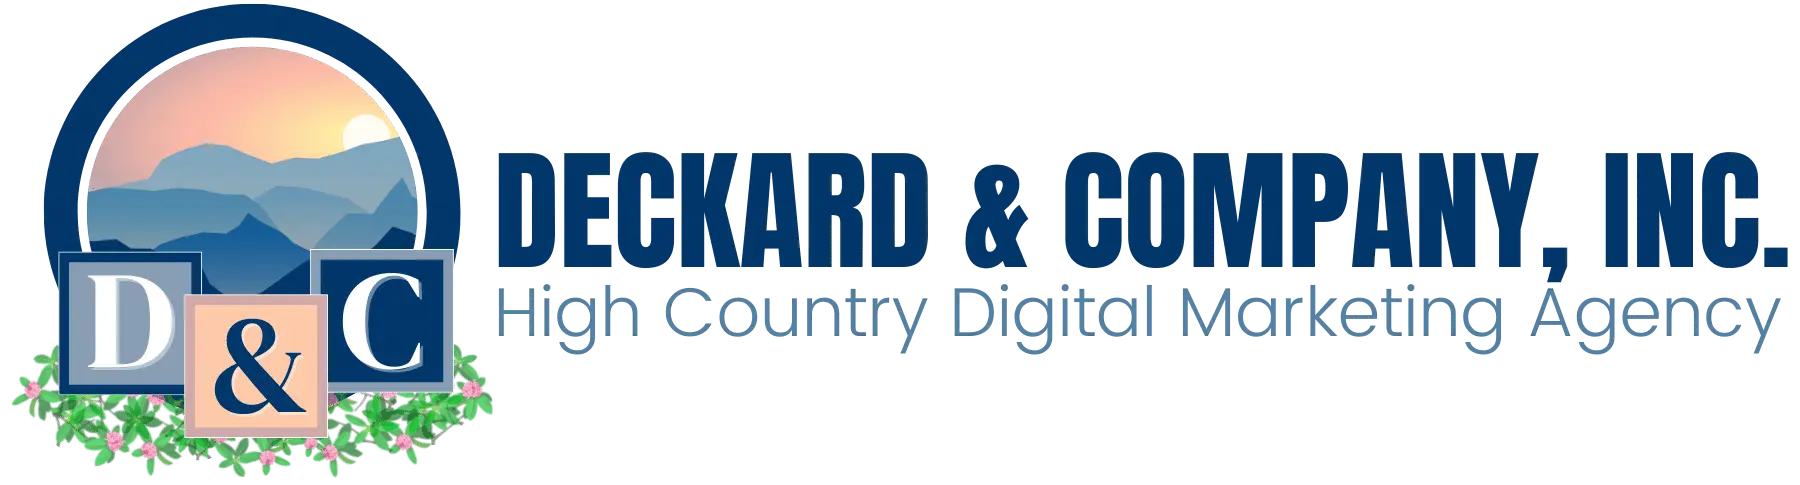 High Country of Banner Elk Website Design, Social Media, and Digital Marketing Services by Deckard & Company.